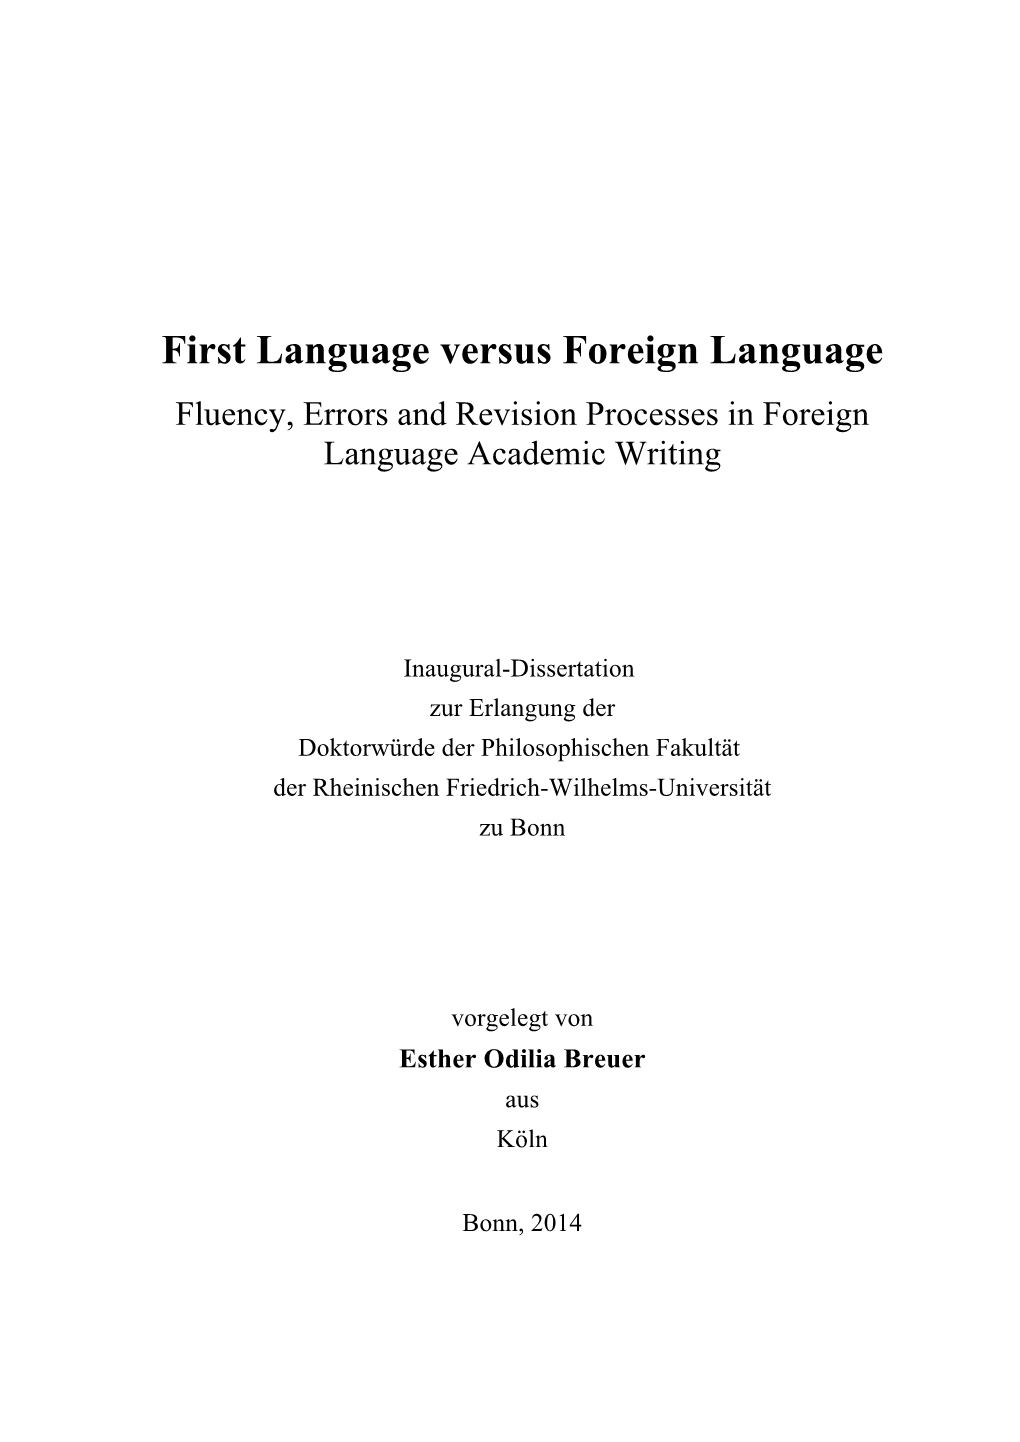 First Language Versus Foreign Language Fluency, Errors and Revision Processes in Foreign Language Academic Writing